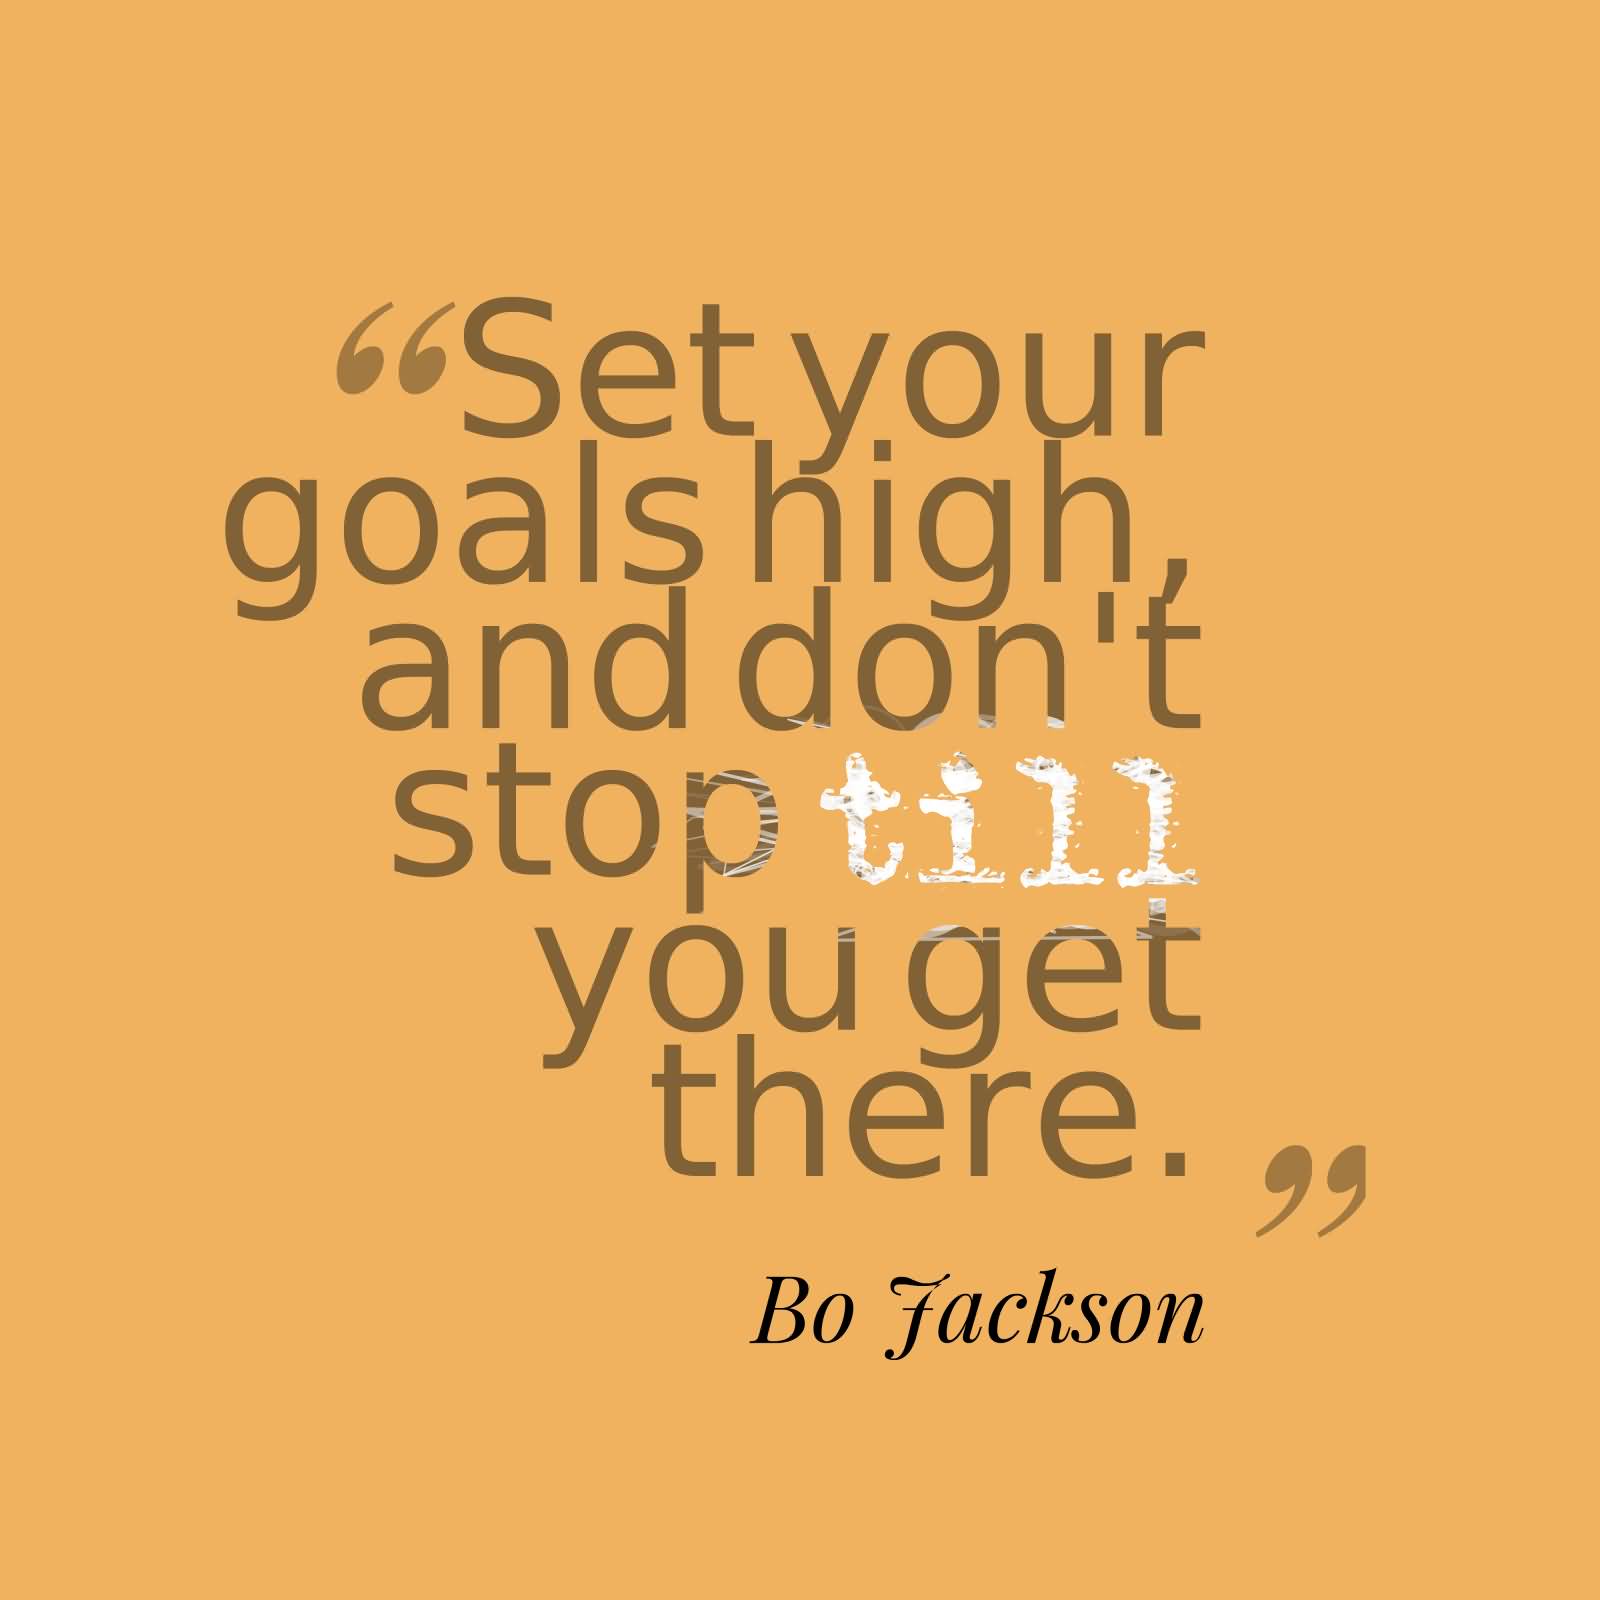 Set your goals high, and don't stop till you get there - Bo Jackson (2)